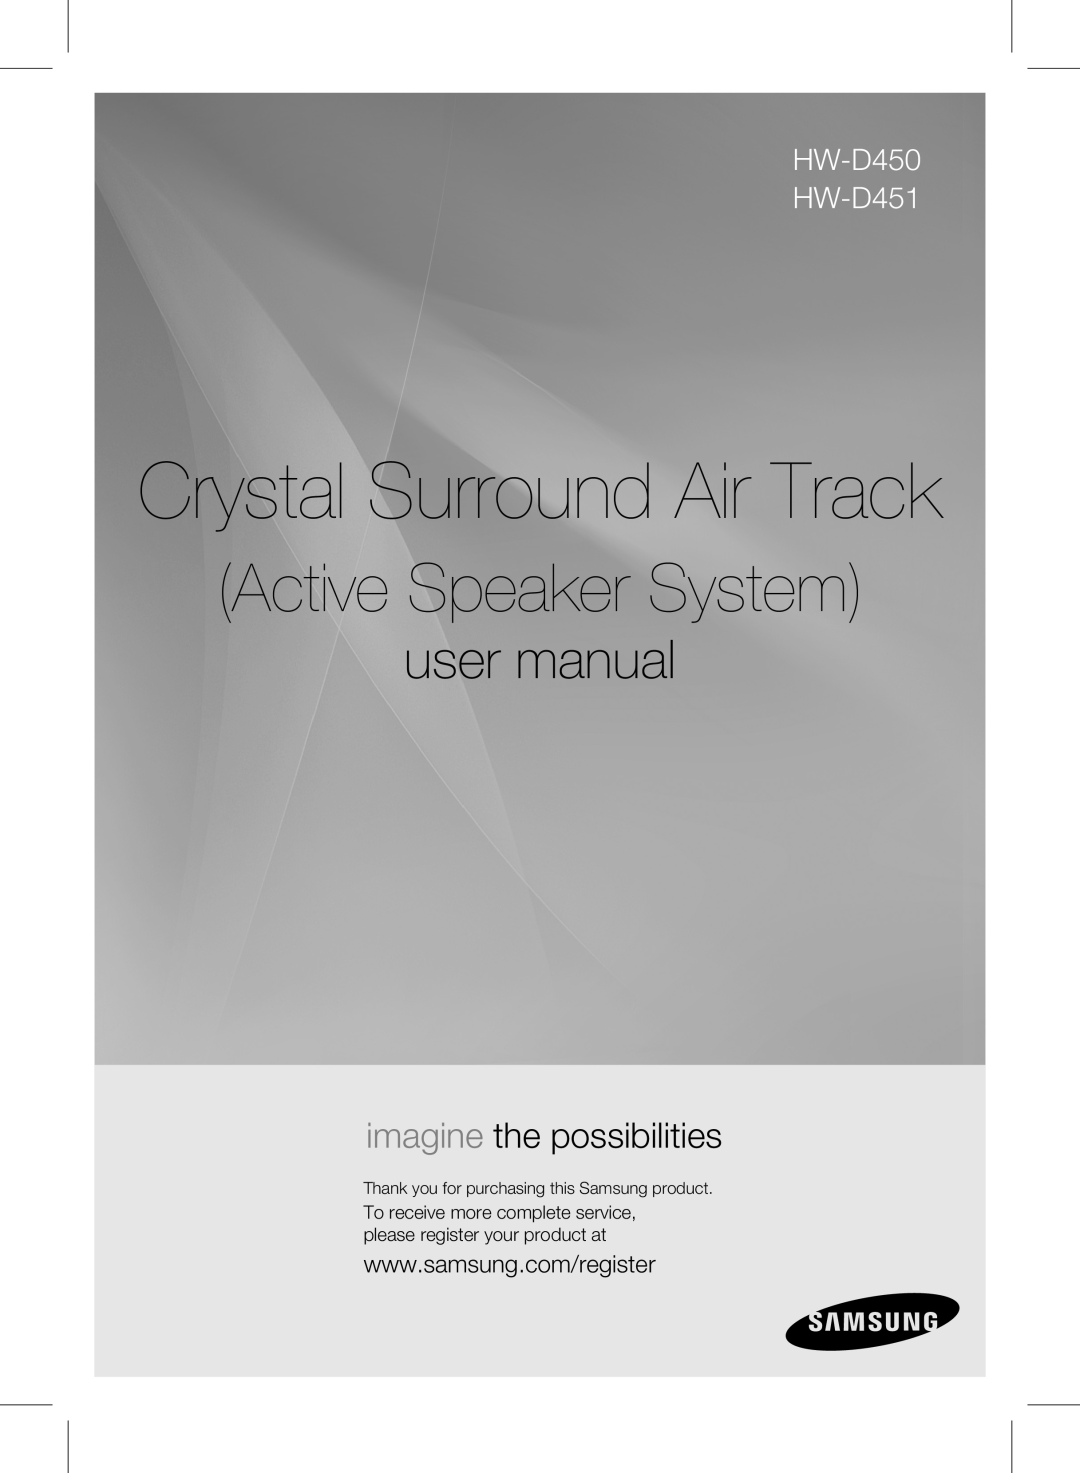 Samsung user manual Crystal Surround Air Track, imagine the possibilities, HW-D450 HW-D451, Active Speaker System 